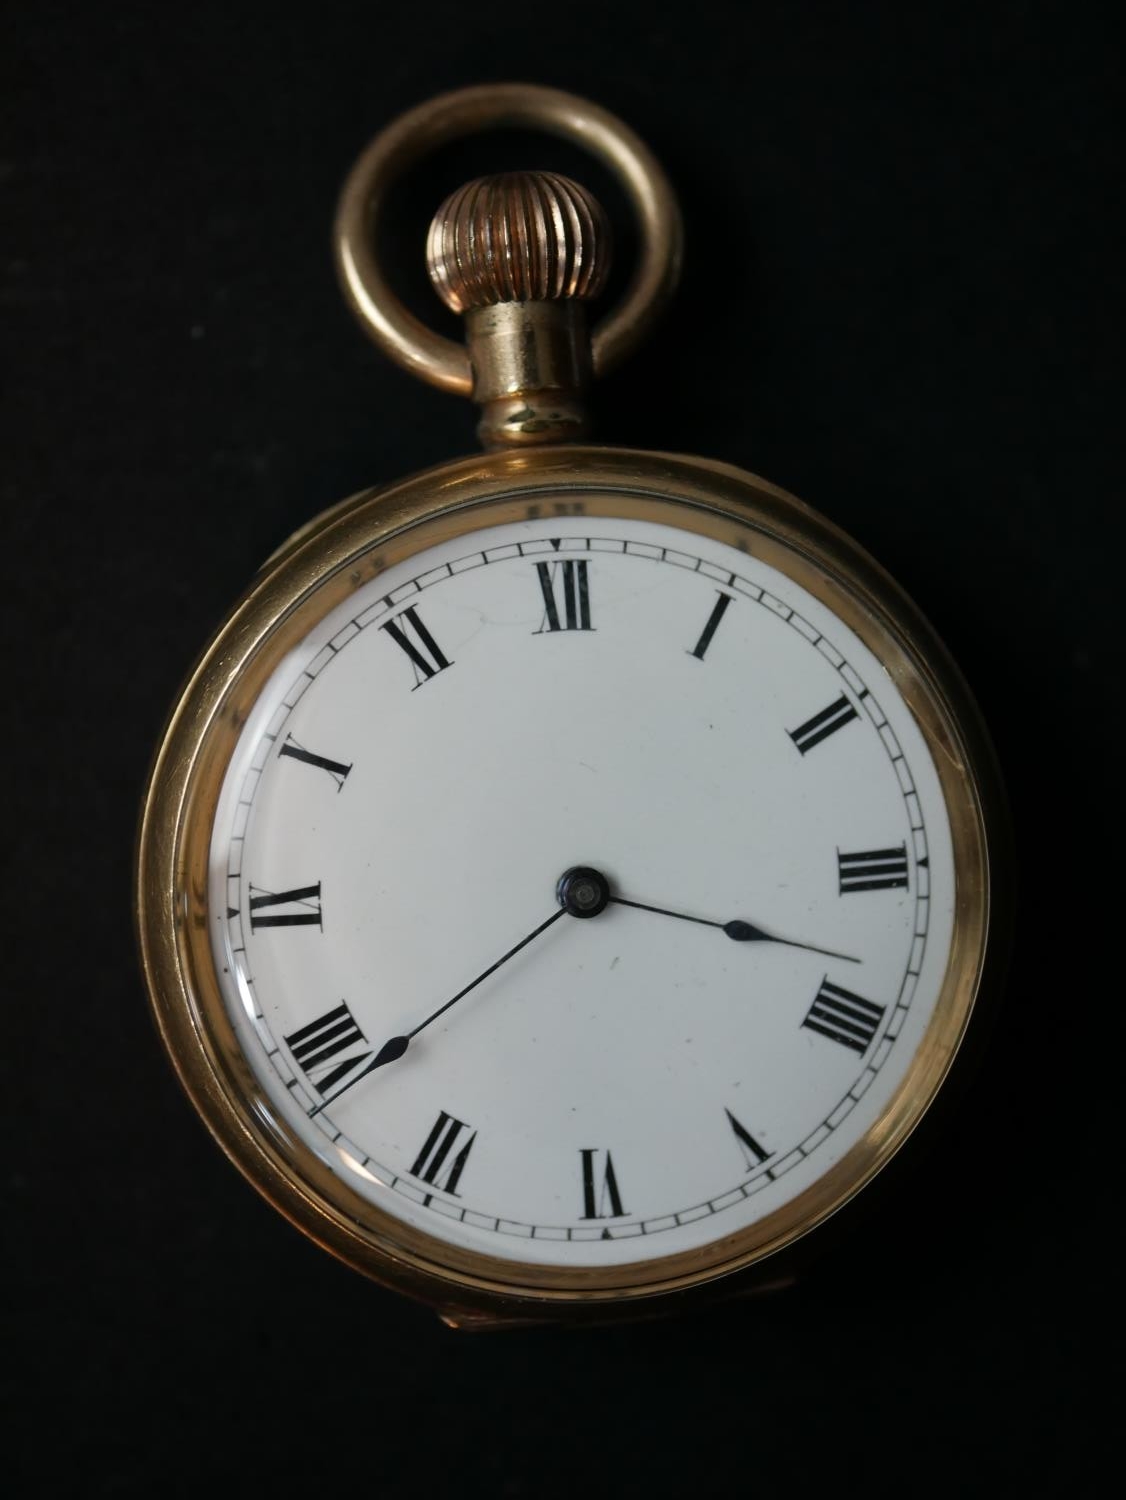 A 14 carat gold American Waltham gentleman's pocket watch with white enamel dial and black roman